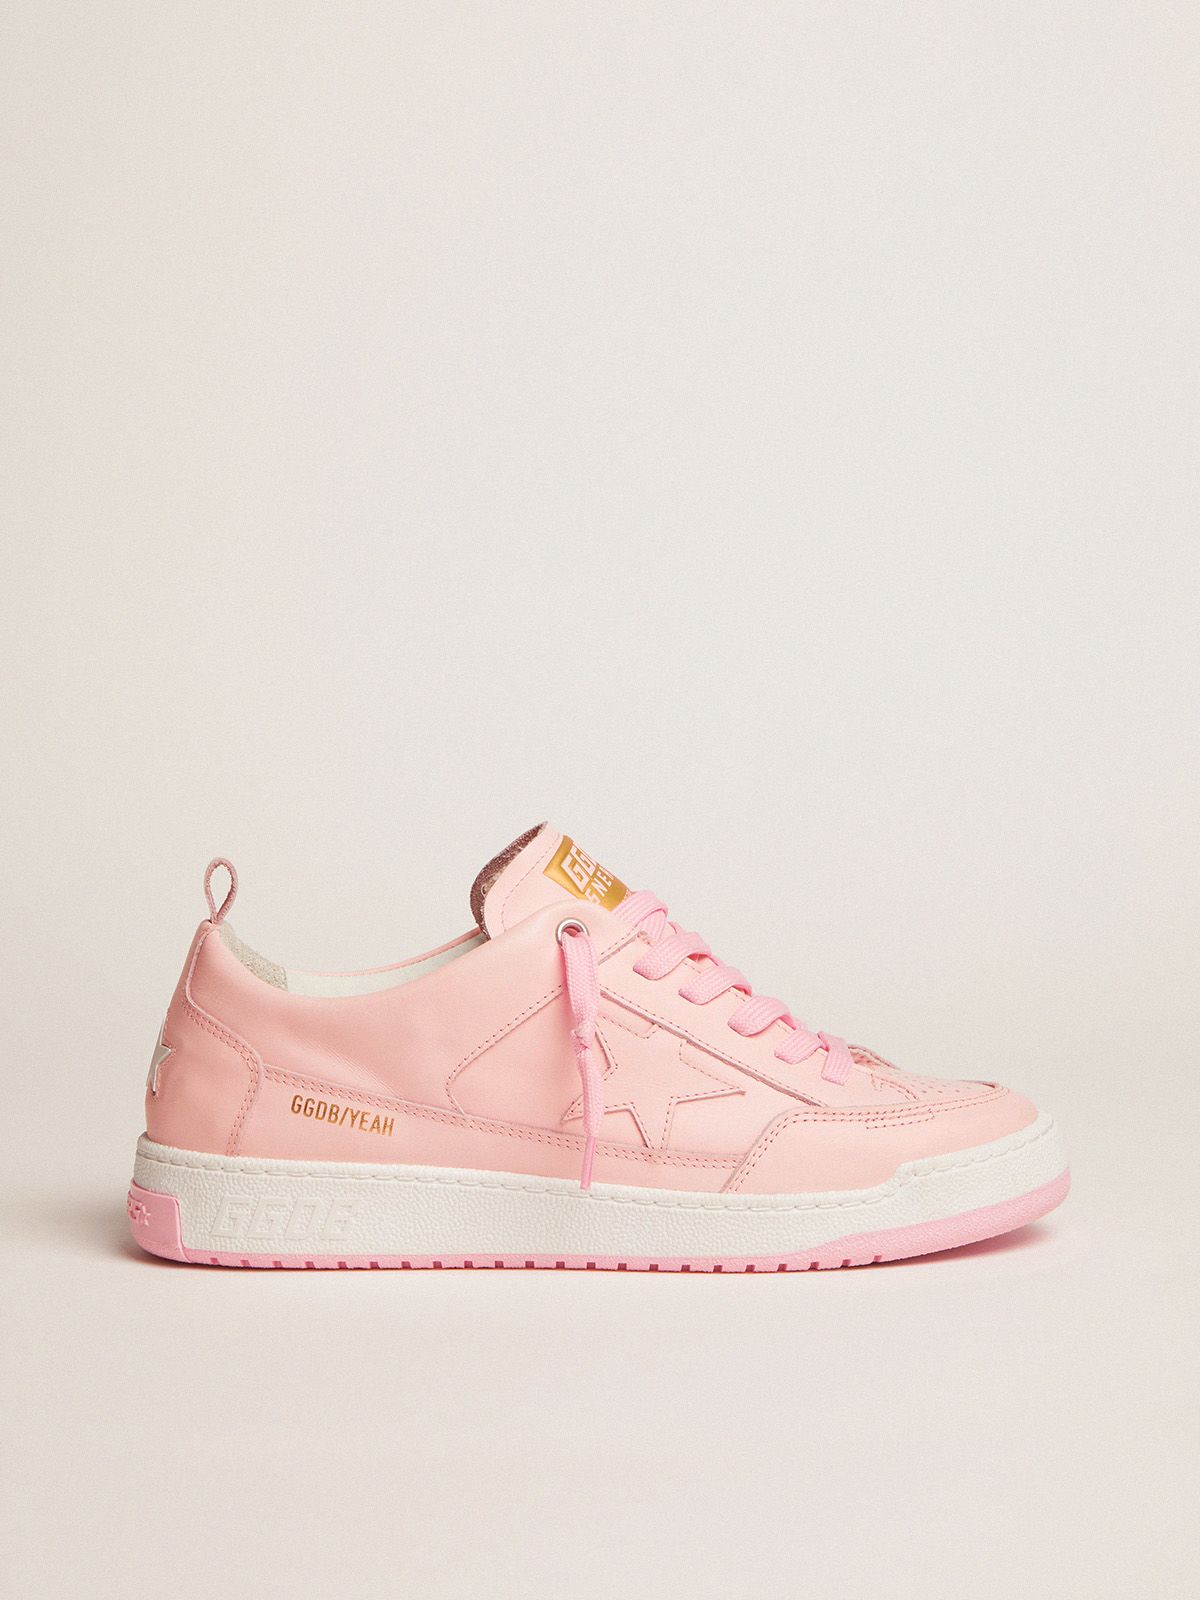 golden goose pink sneakers in pale leather Yeah